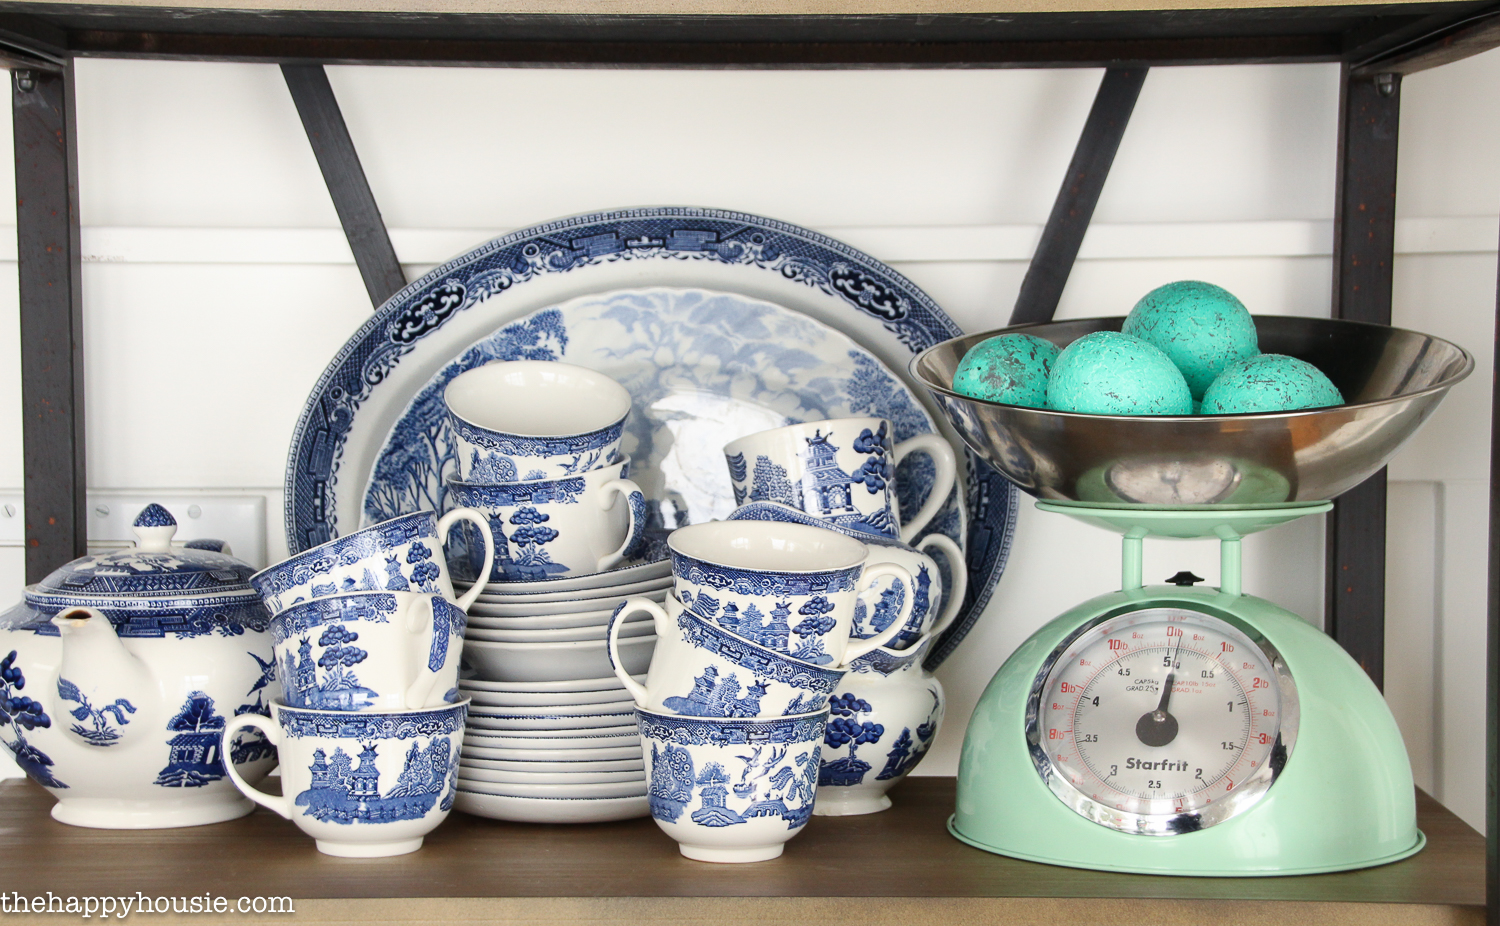 Up close shot of blue and white dishes on the shelf.